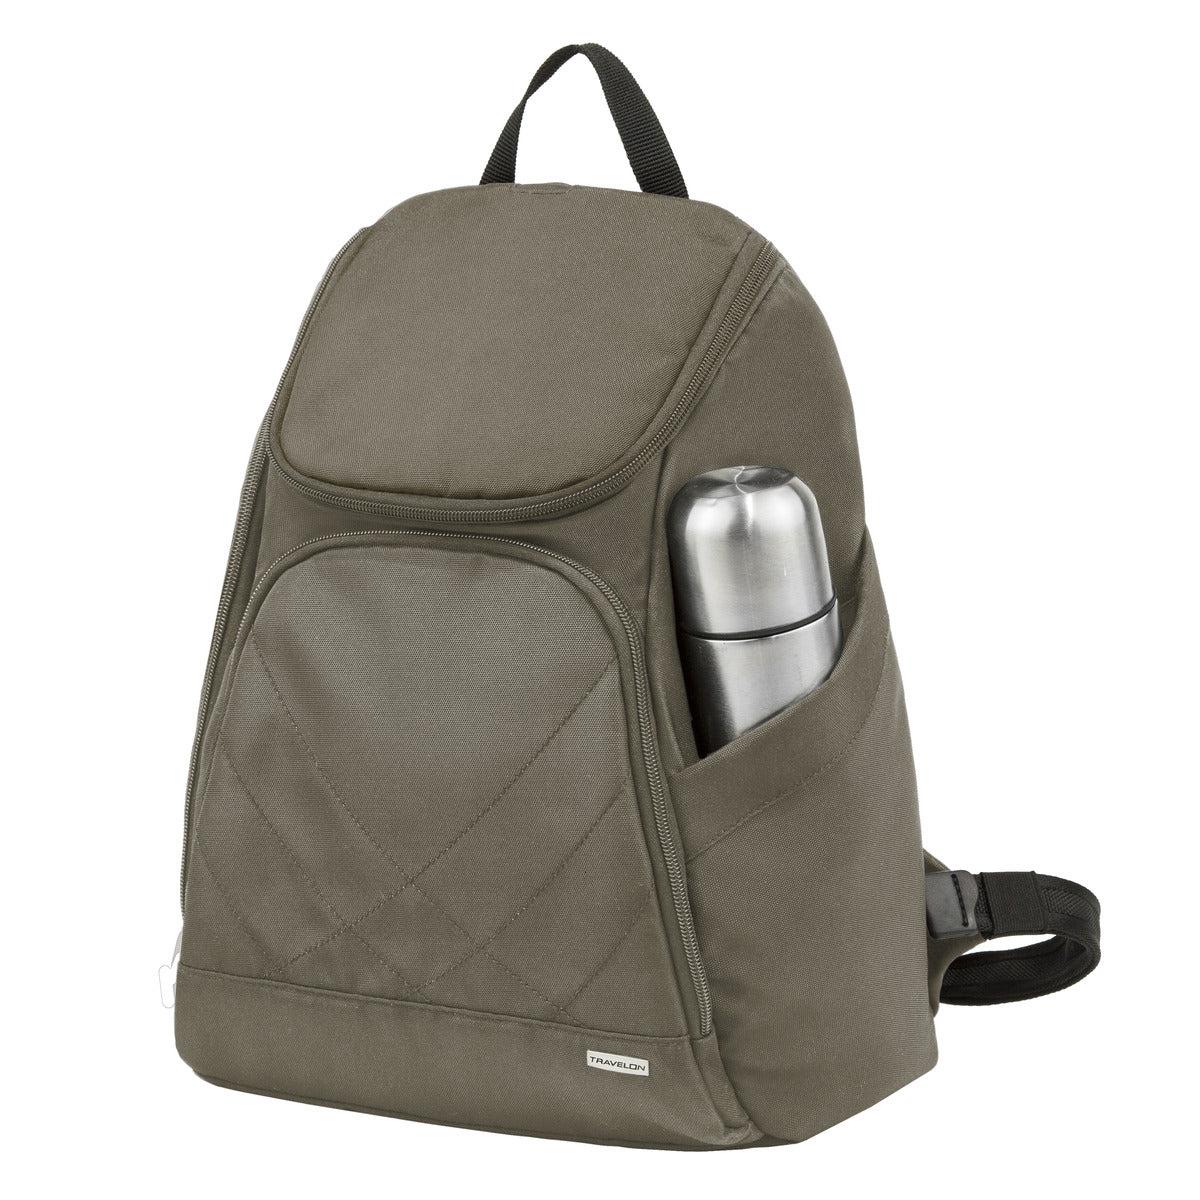 AAA.com l Travelon Packable Backpack